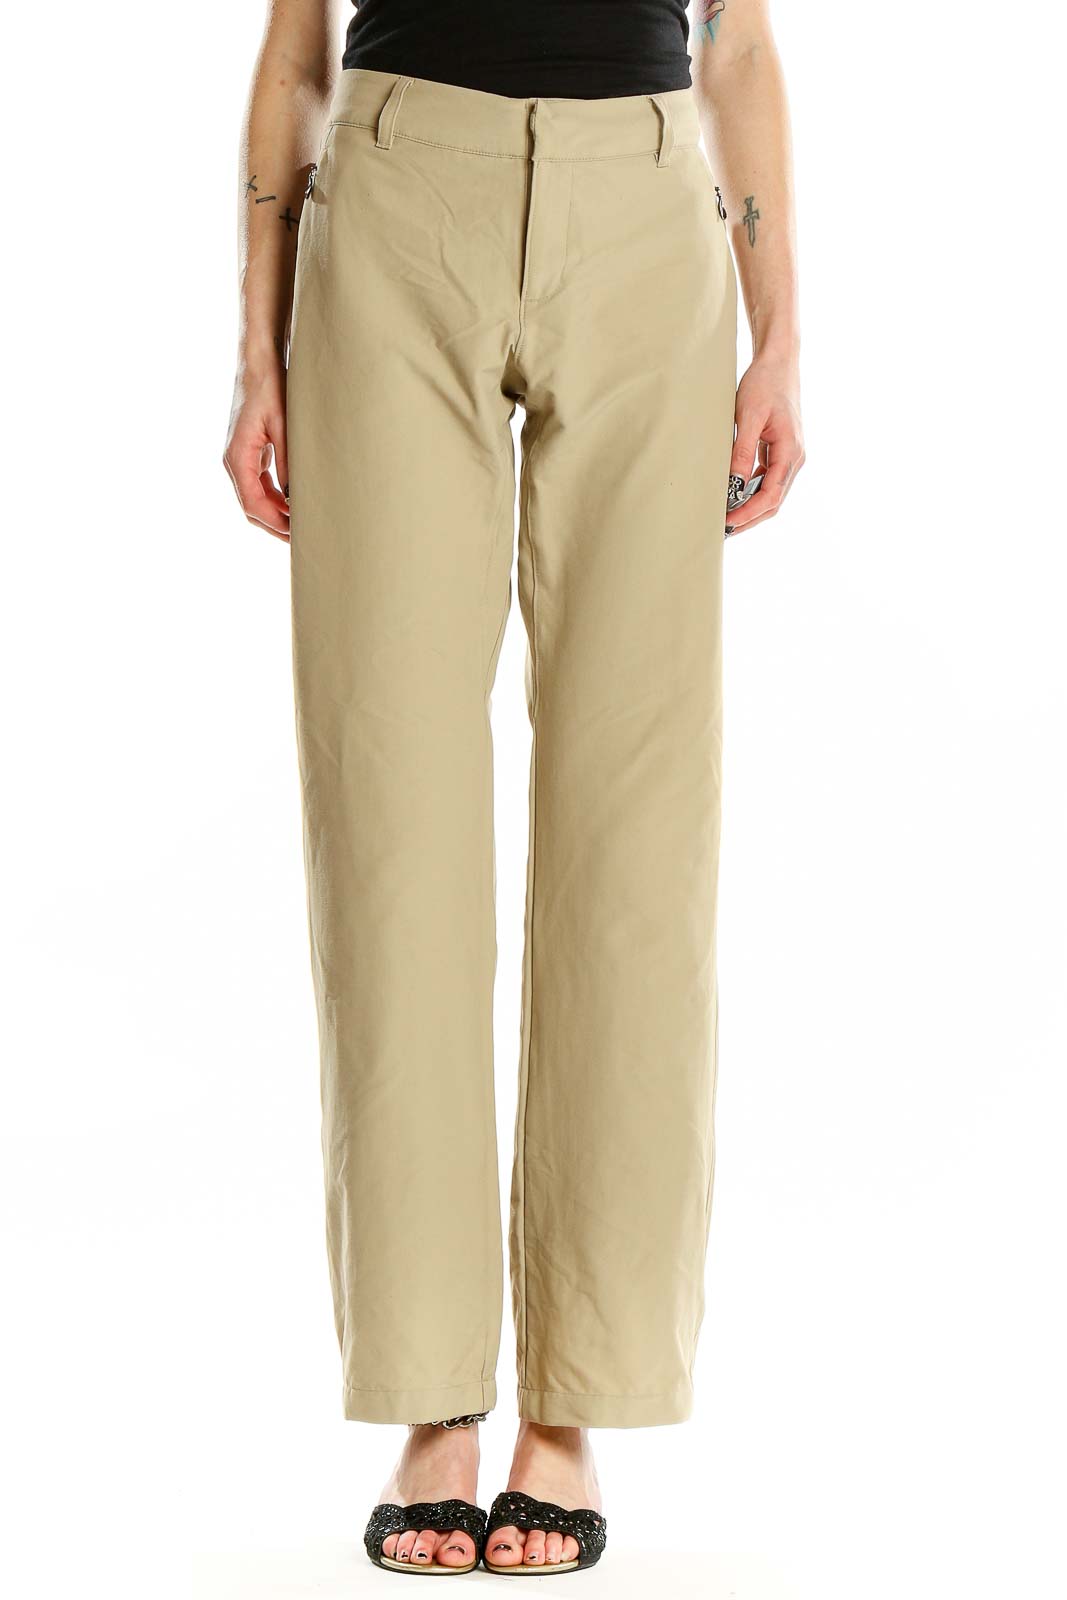 Beige Straight Pants Front